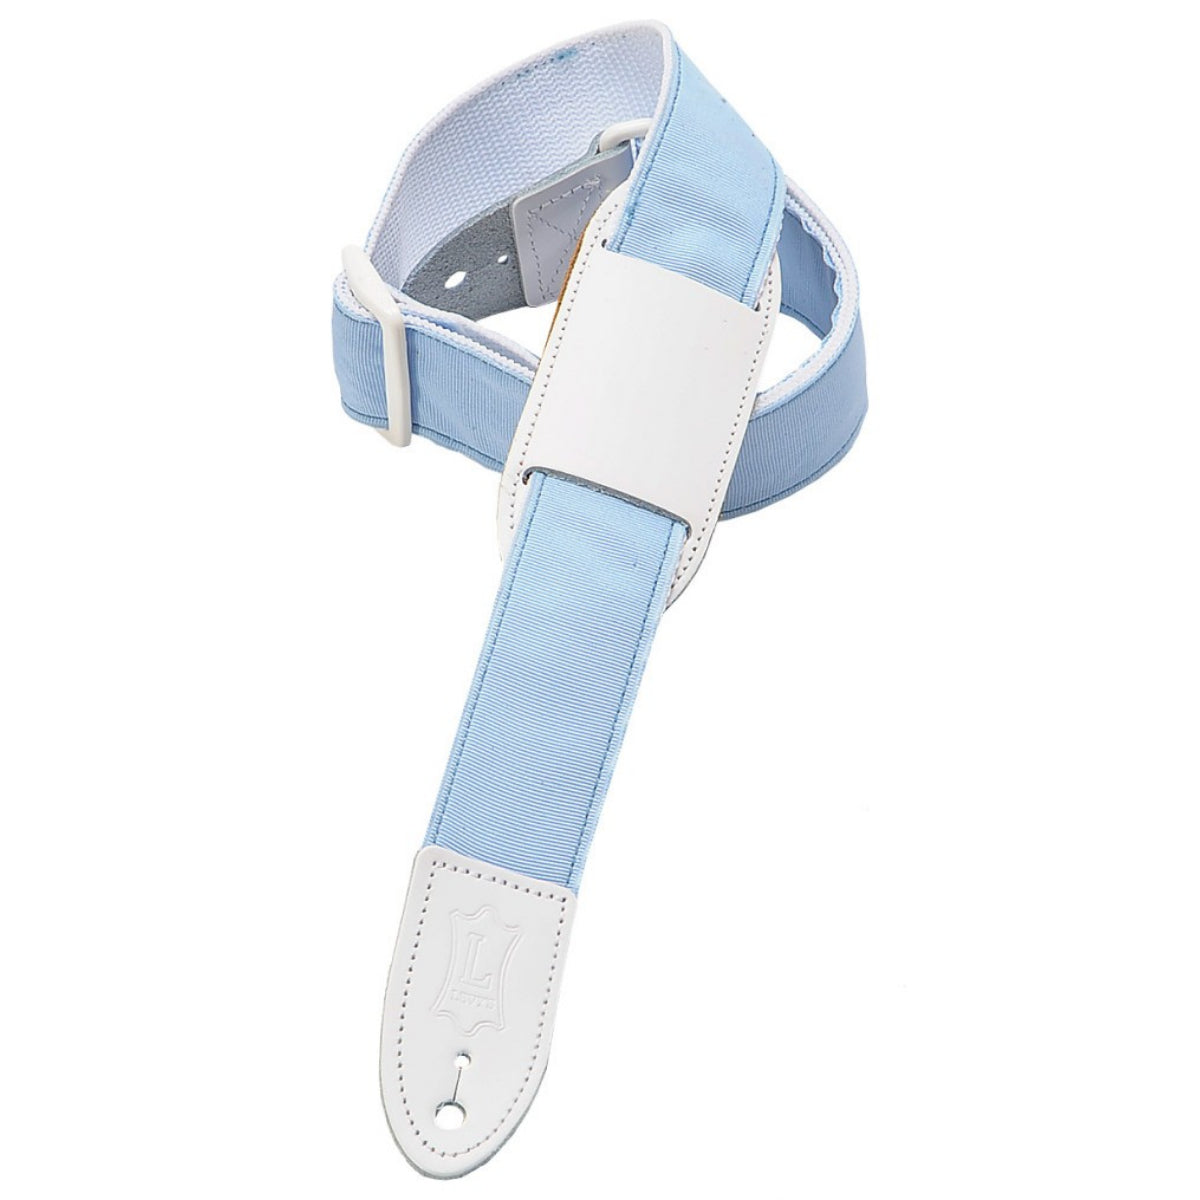 Levy's M8PJG-LTB 1.5" Poly Light Blue Youth Strap